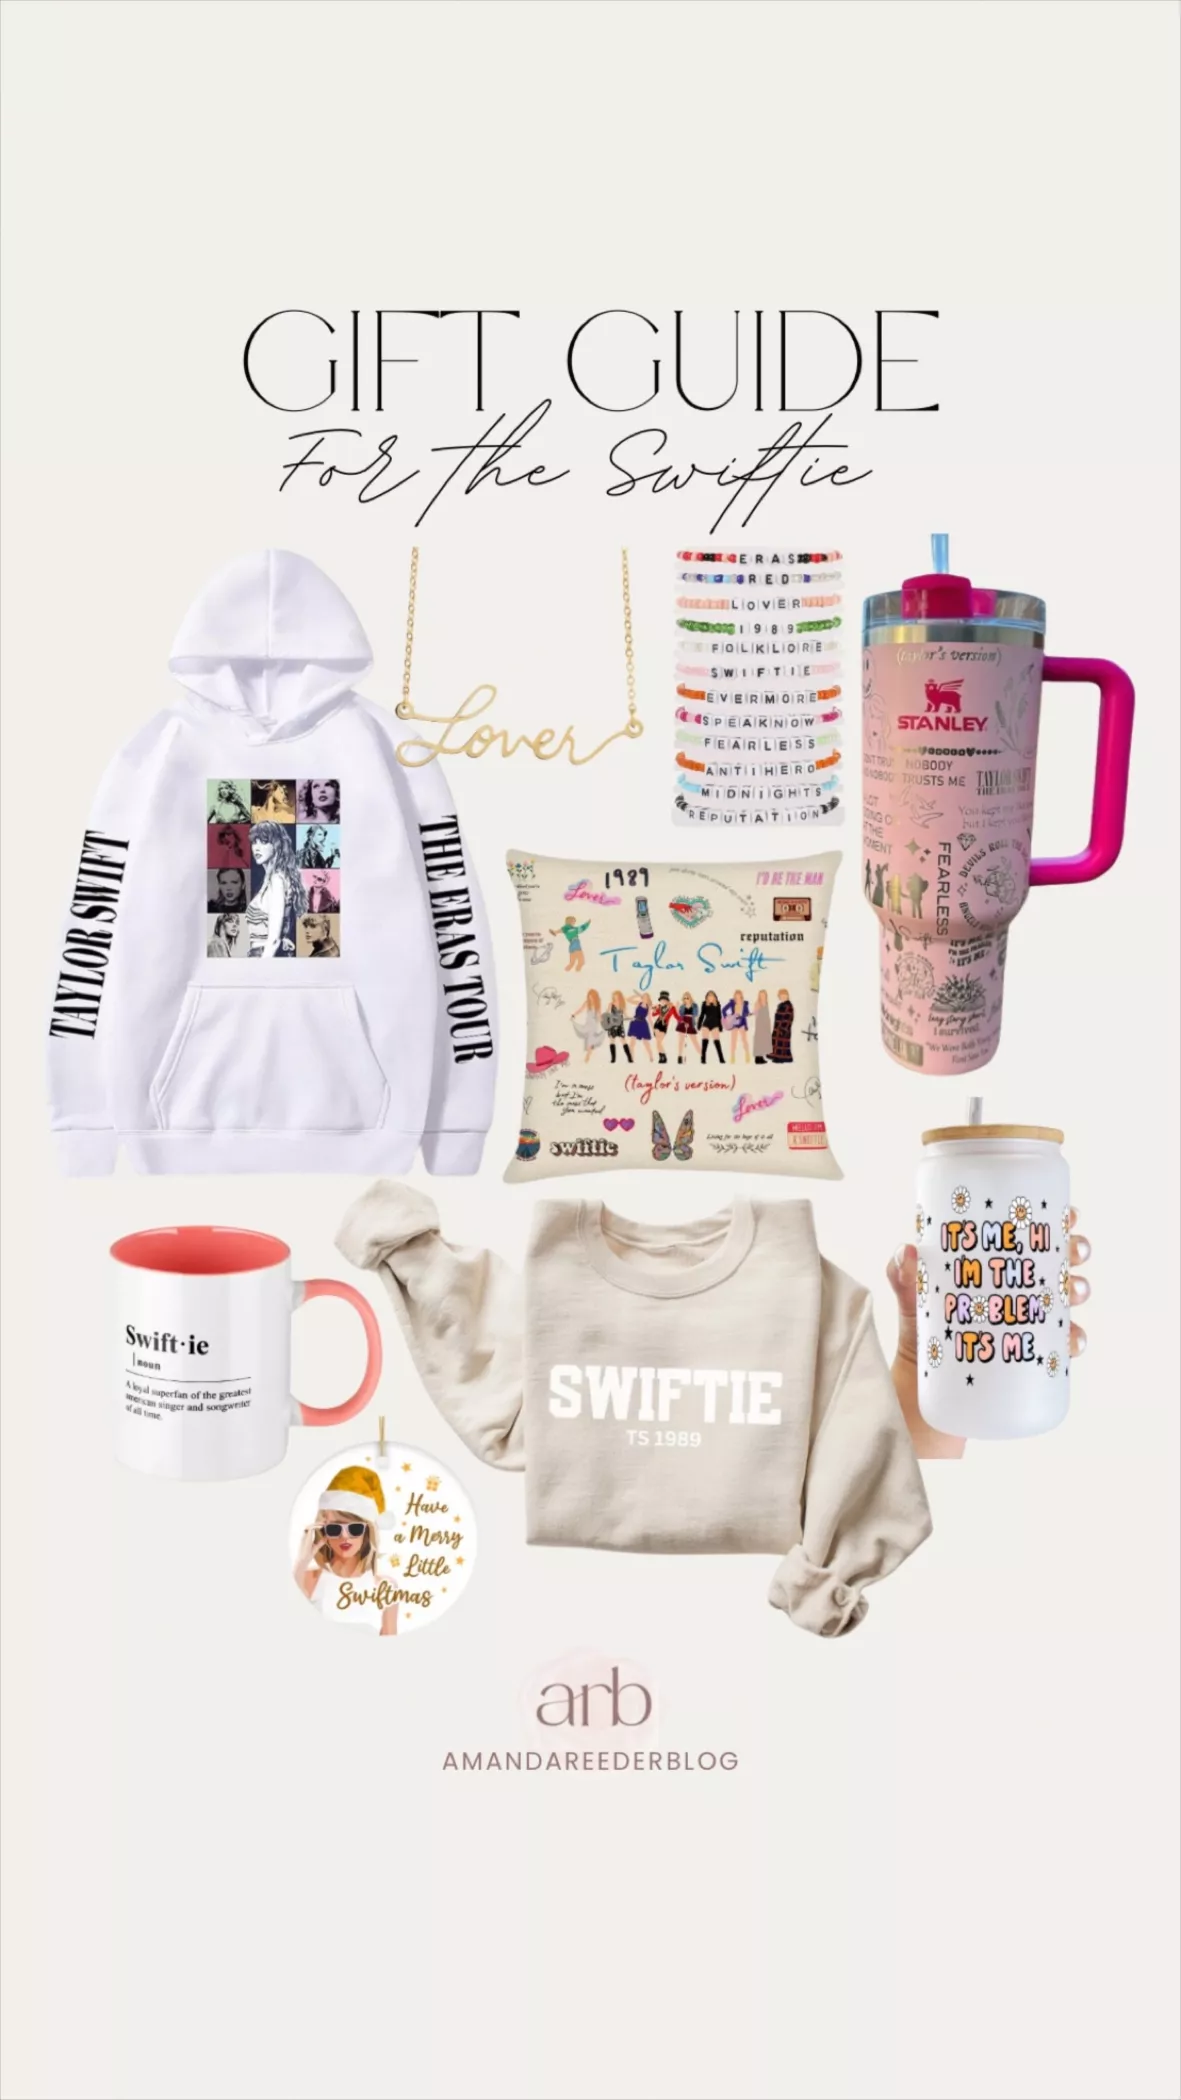 The Best Taylor Swift Gifts for Teens - Everything Your Swiftie